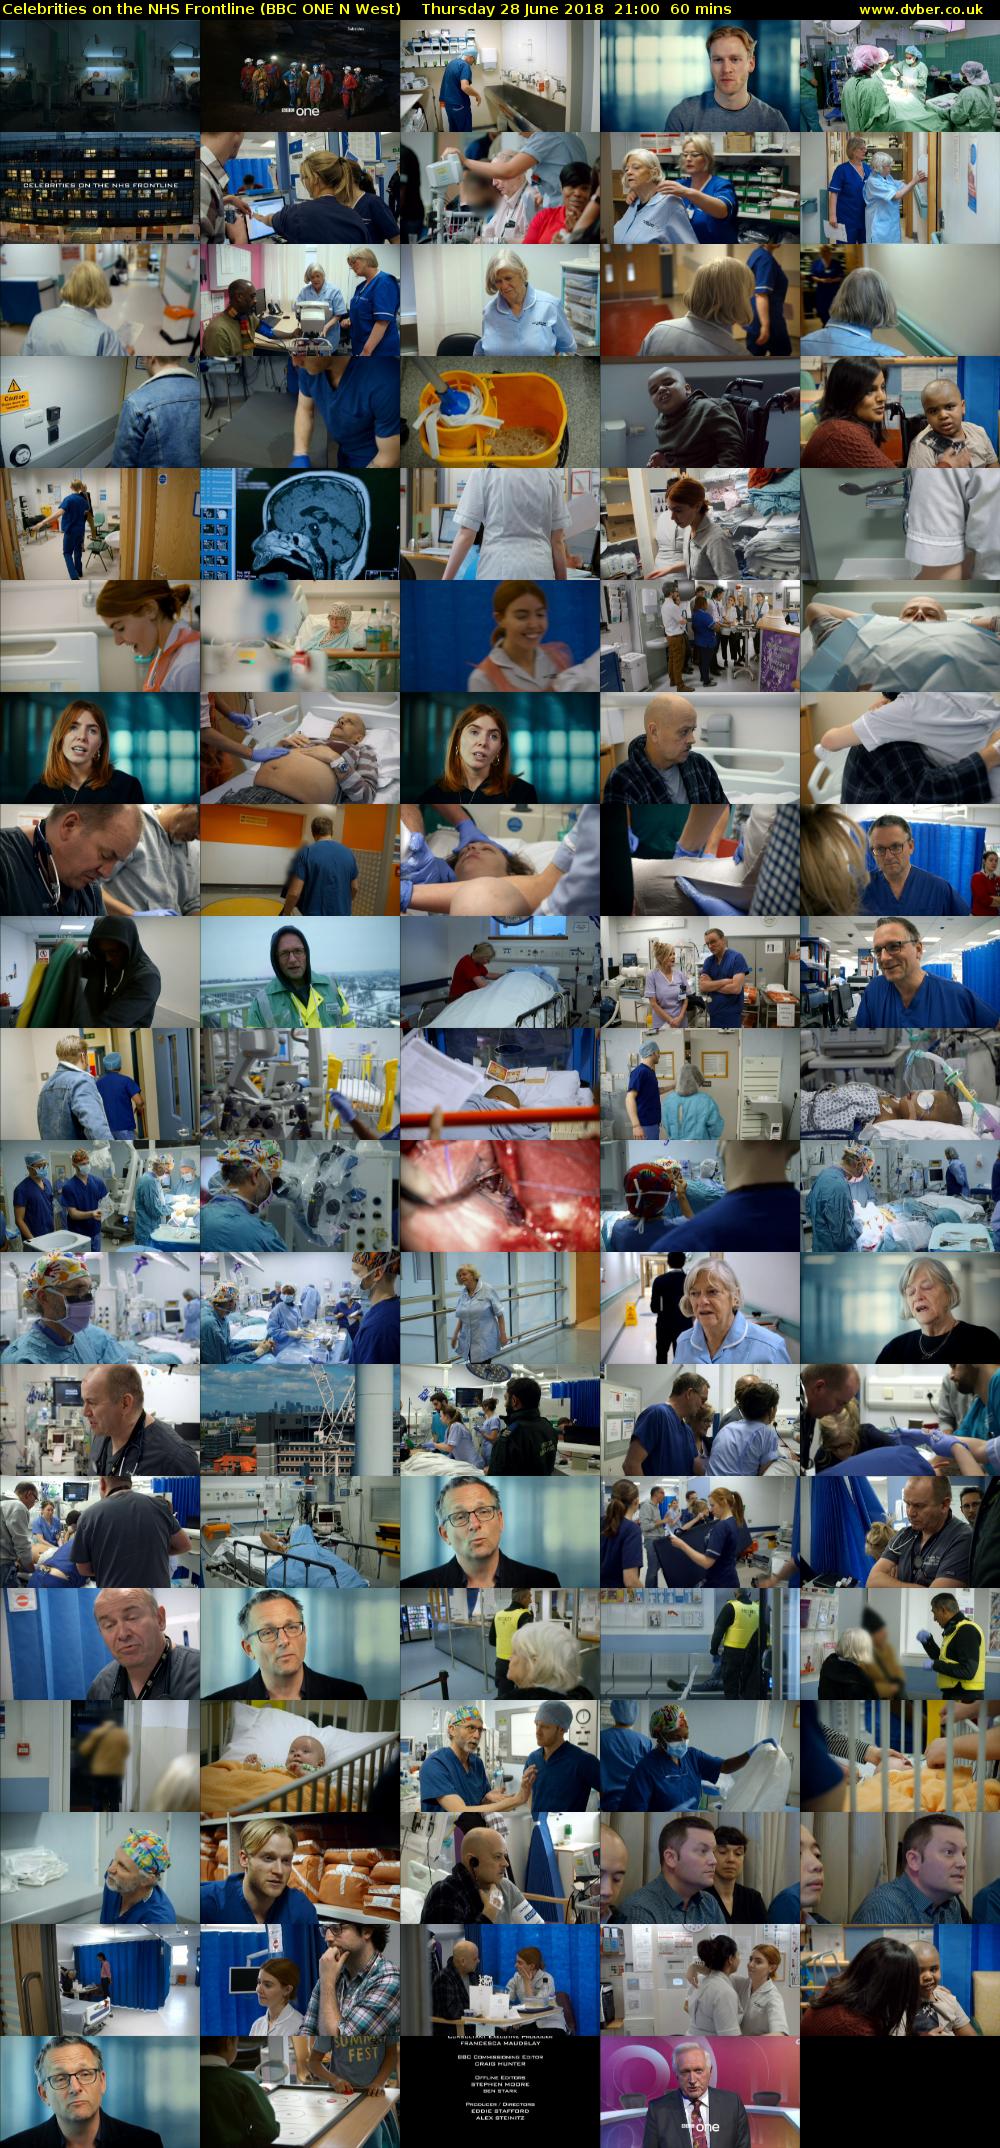 Celebrities on the NHS Frontline (BBC ONE N West) Thursday 28 June 2018 21:00 - 22:00